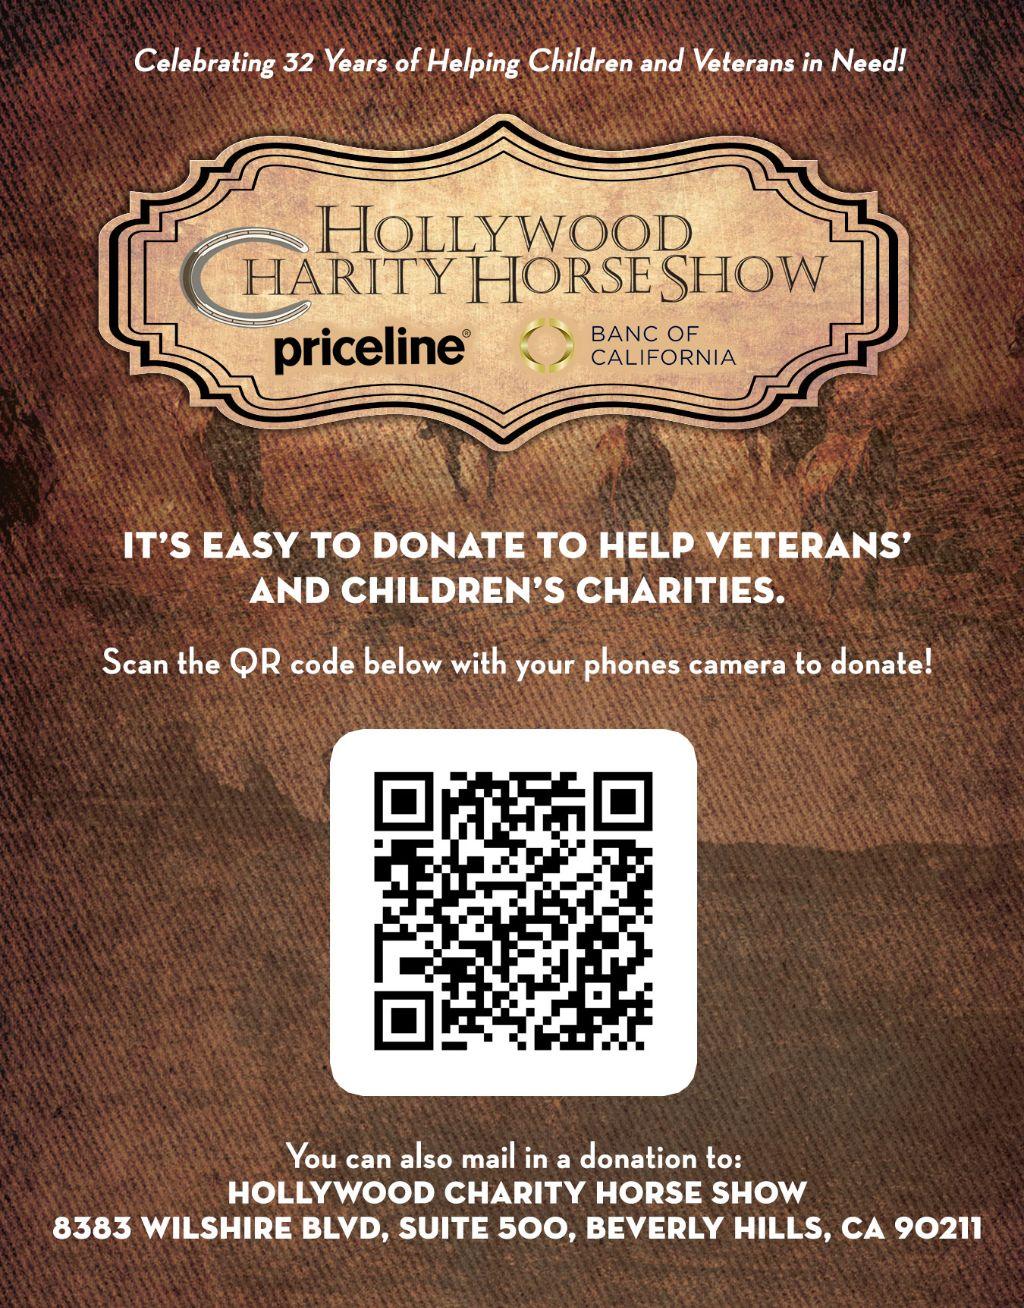 Want to Just Donate to the Hollywood Charity Horse Show?